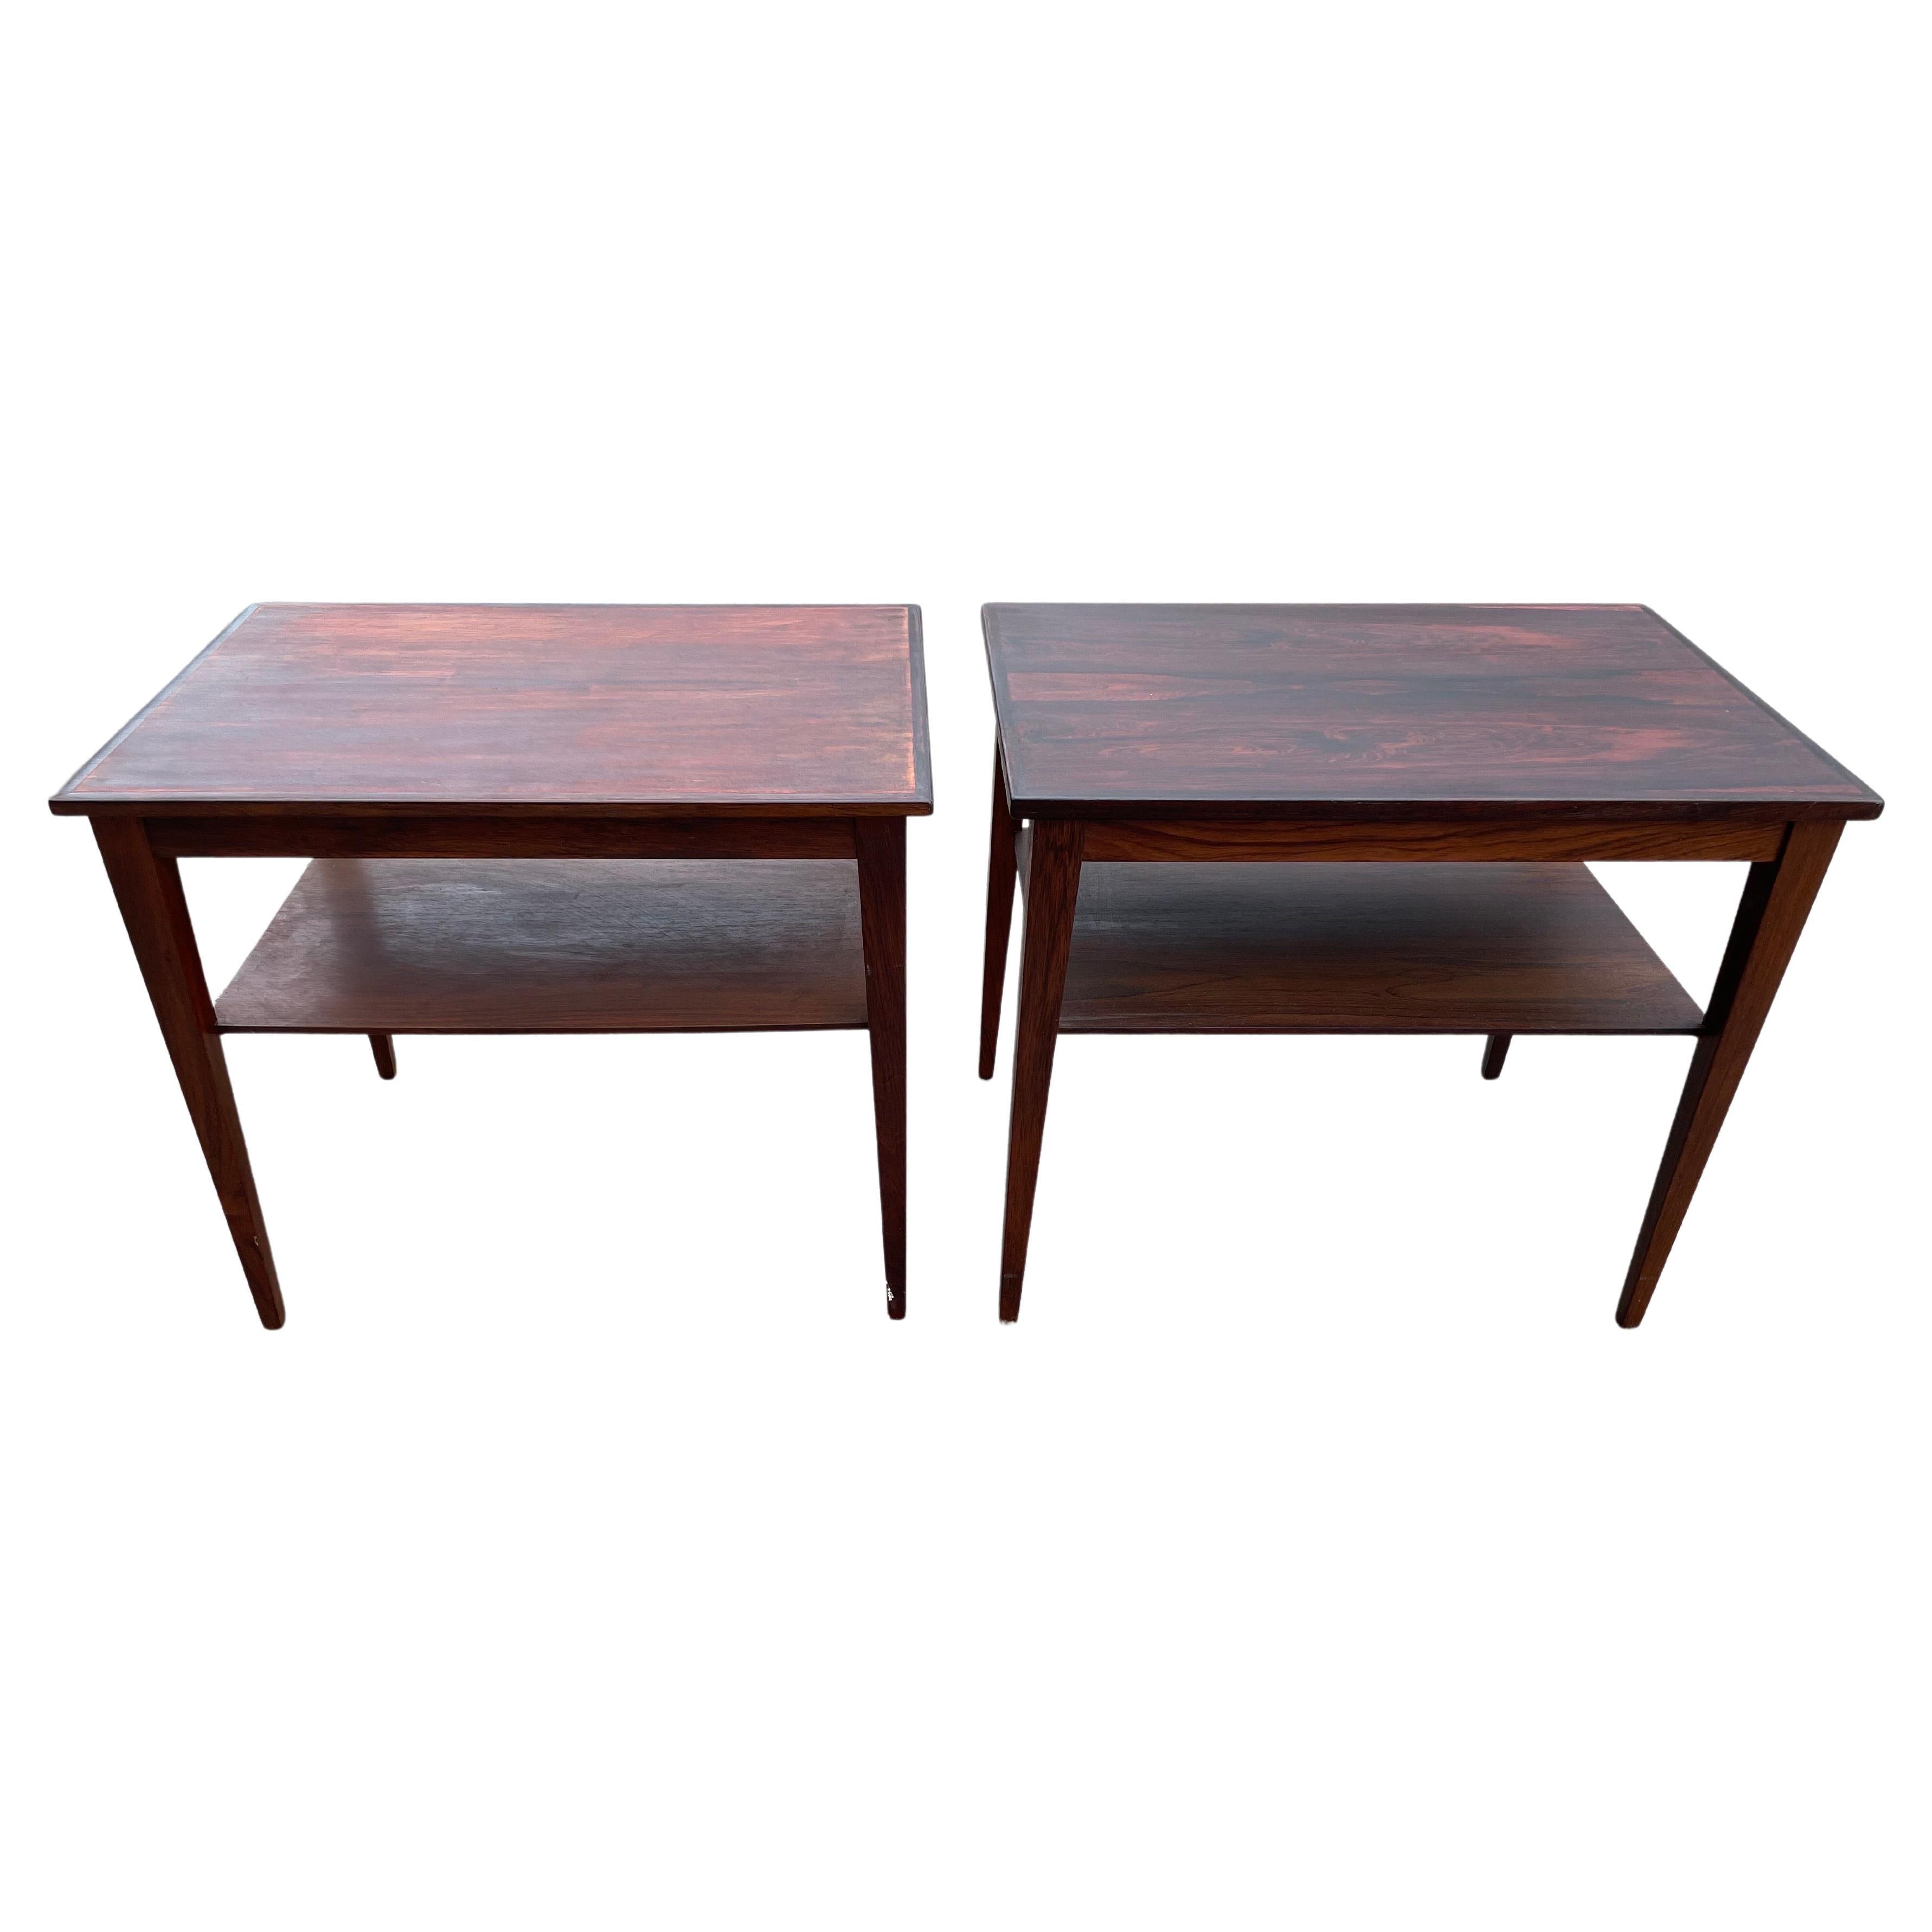 Pair of Danish Mid-Century Modern Nightstands or Sidetables from the, 1960s For Sale